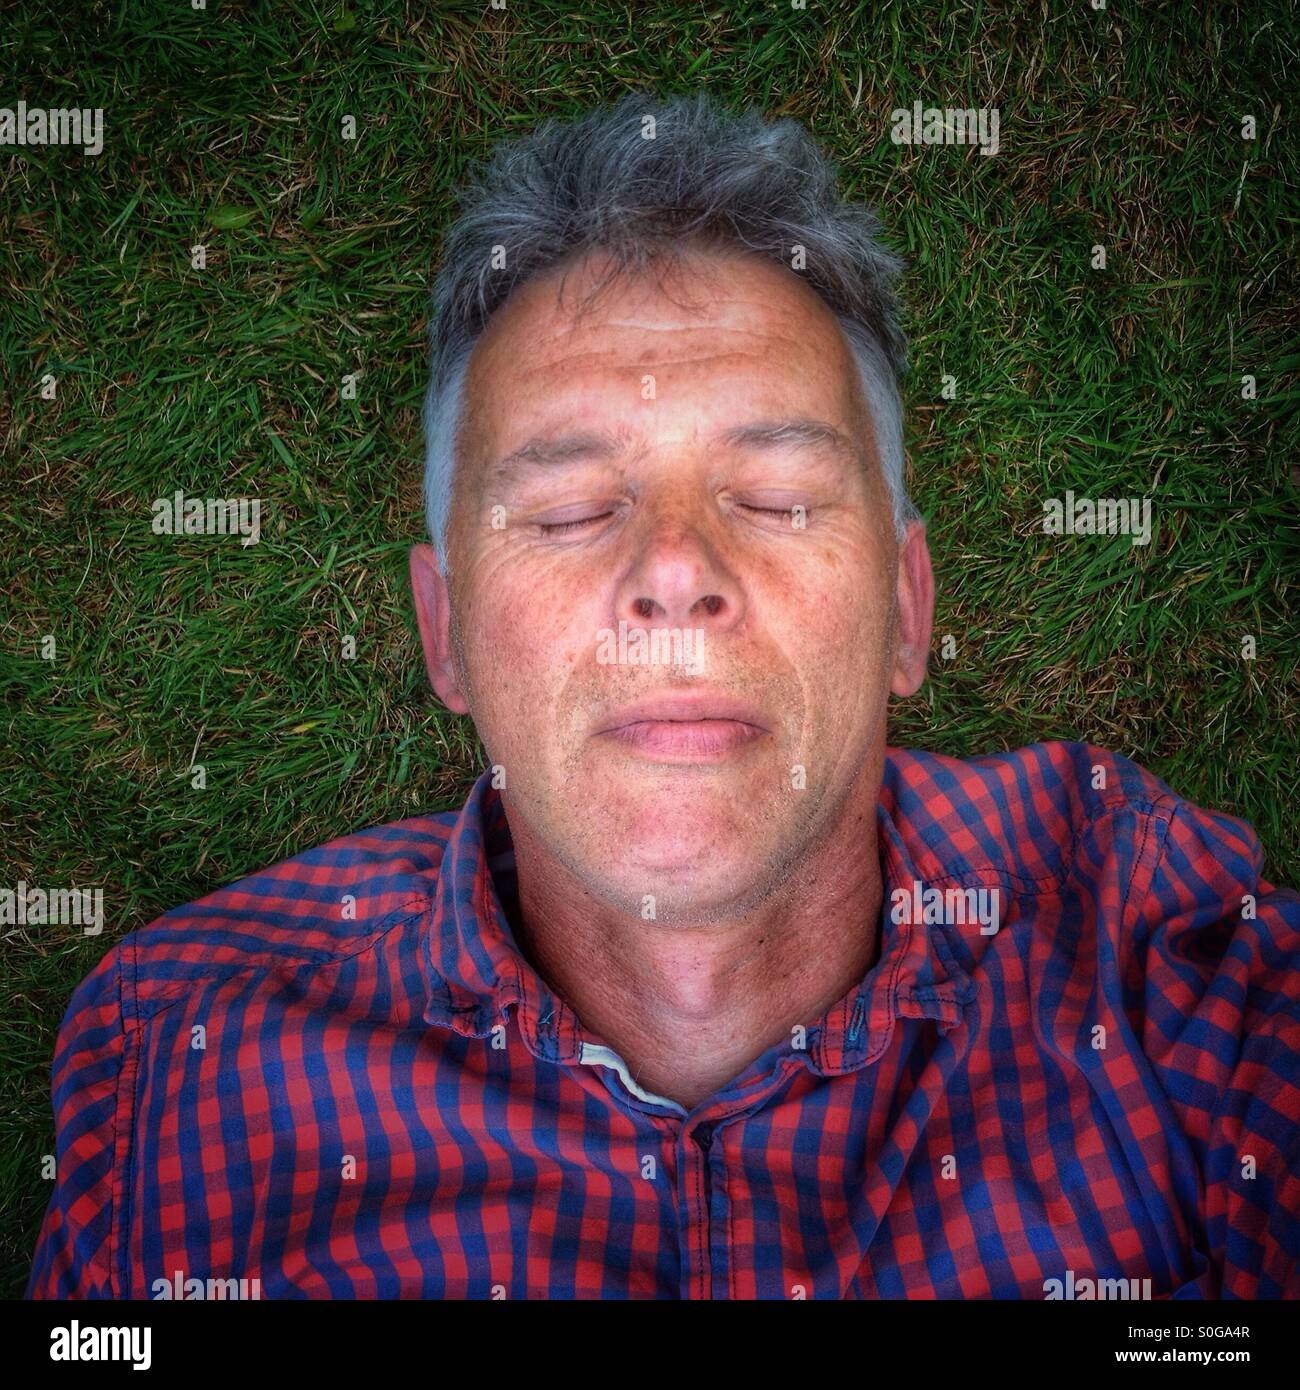 Man with closed eyes lying on grass. Stock Photo